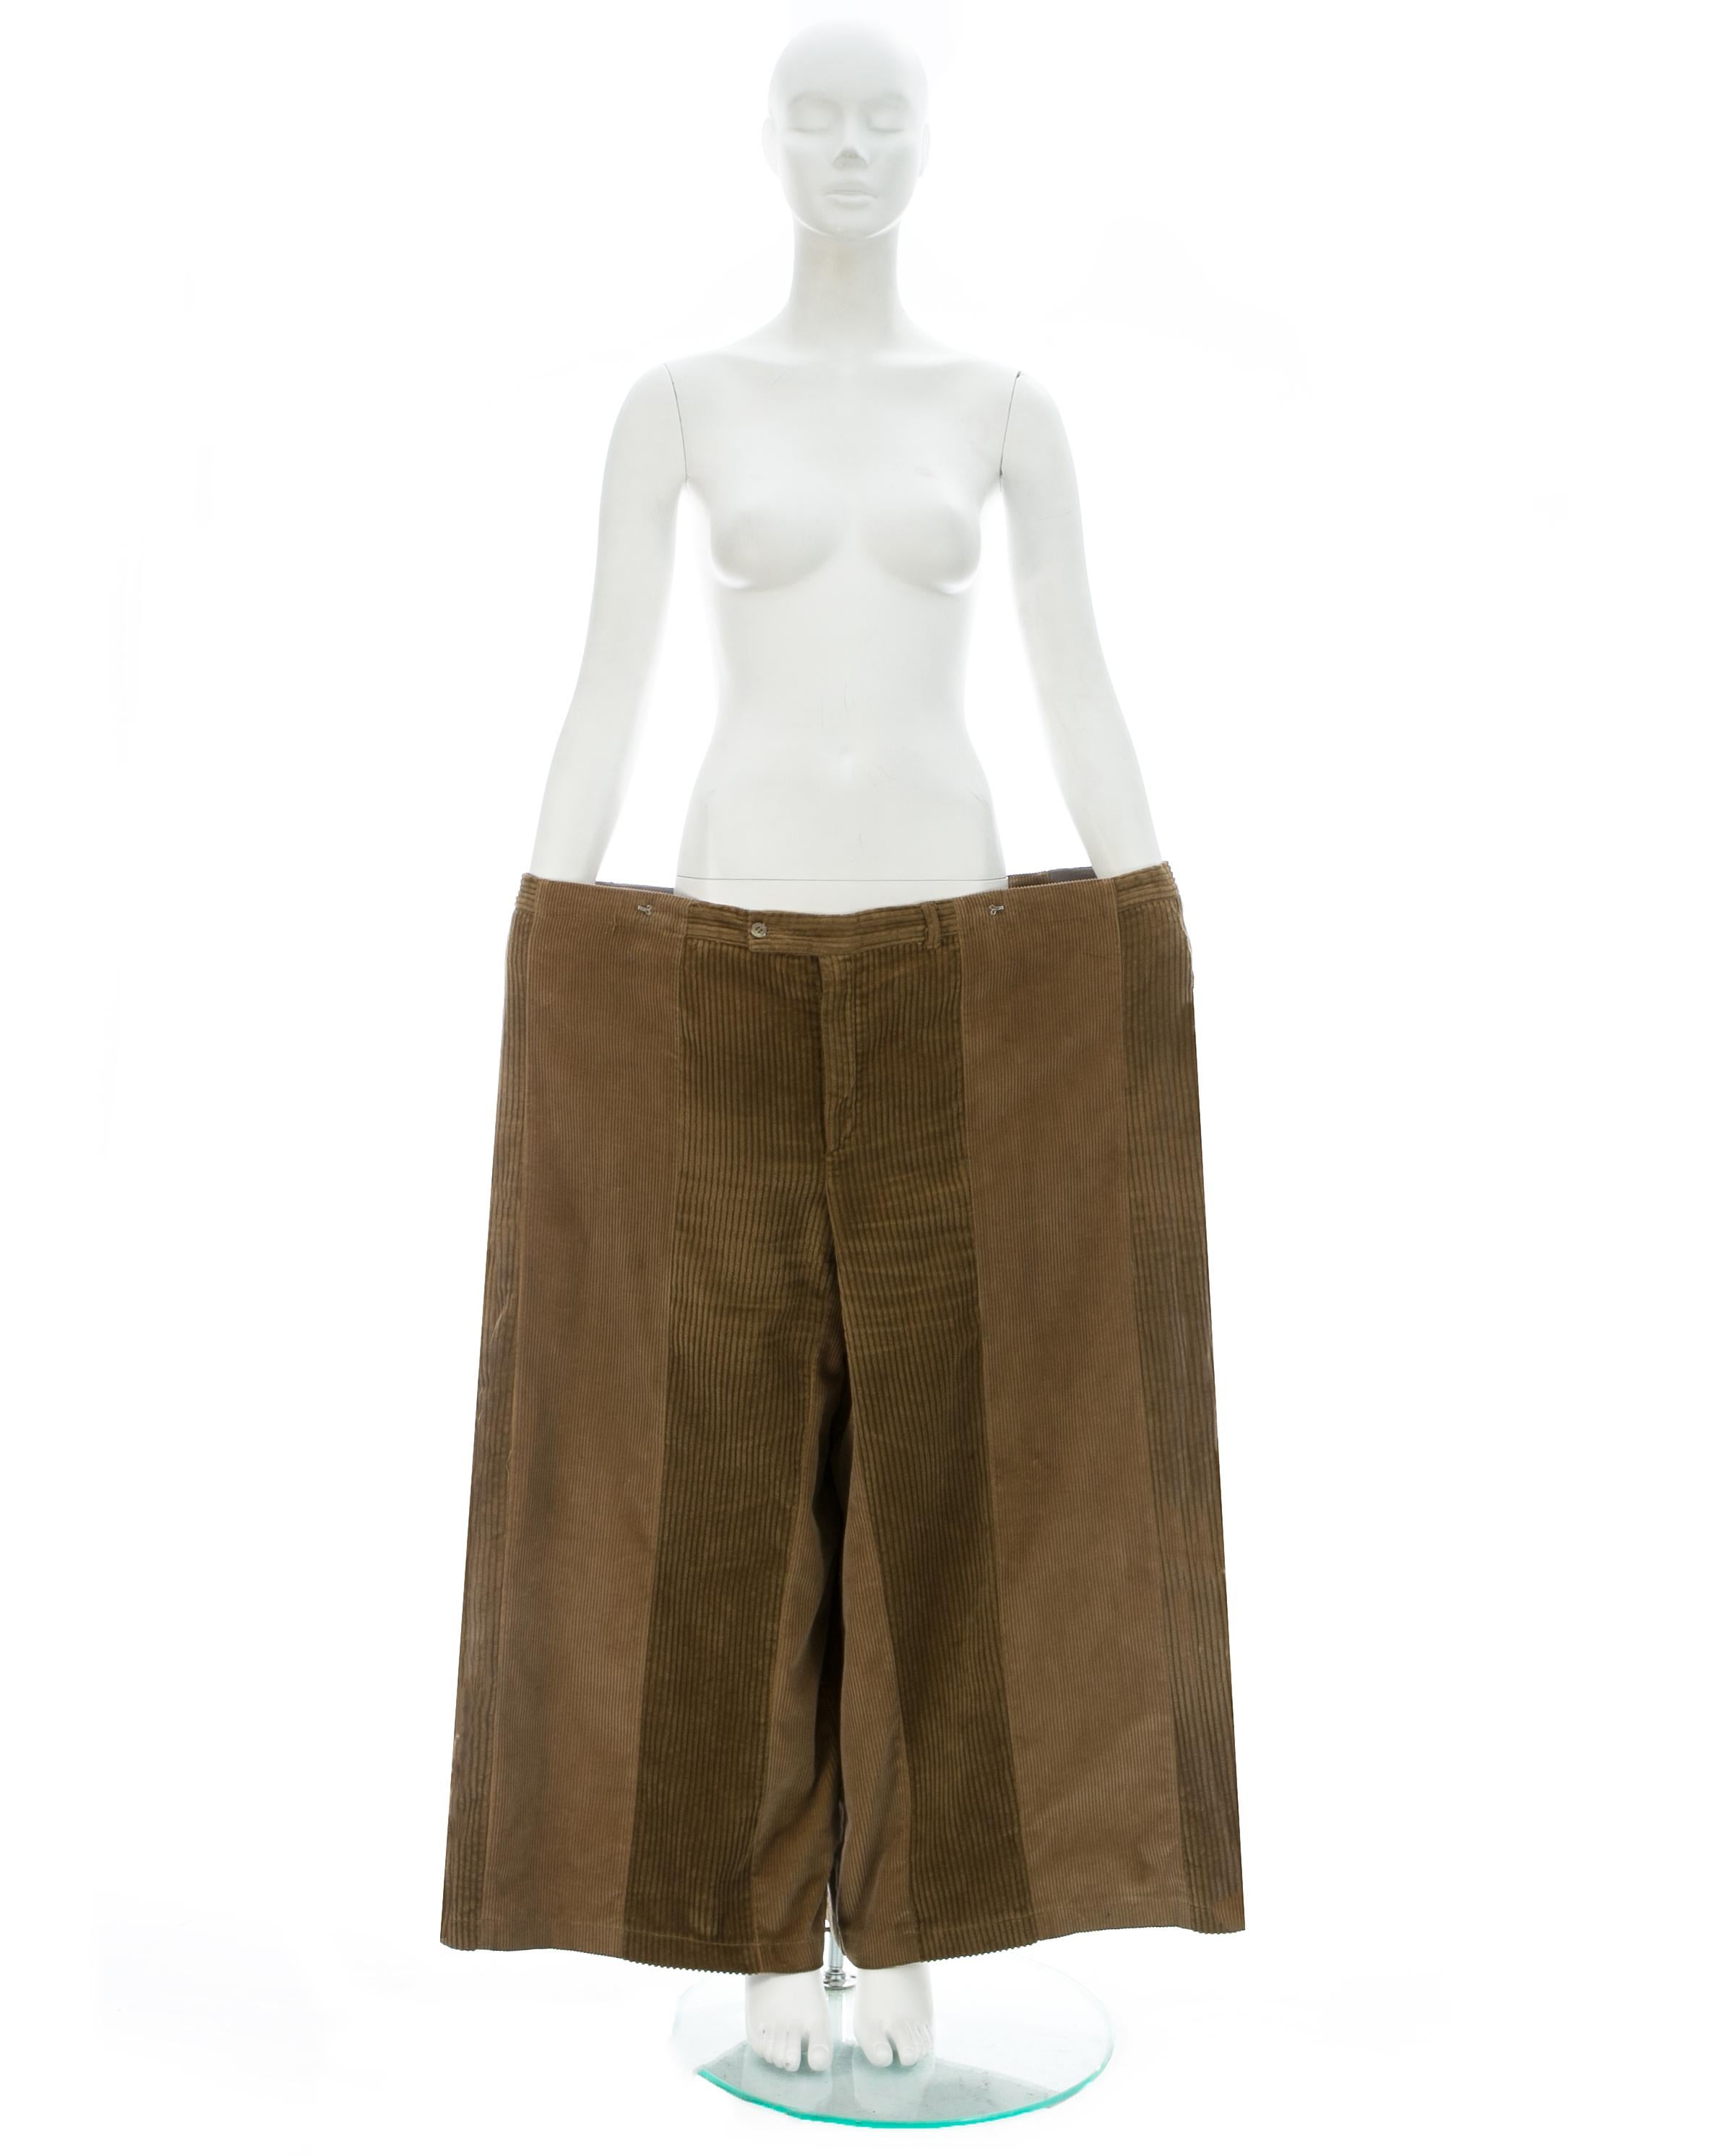 Margiela; Oversized pants reconstructed with 2 pairs of vintage corduroy pants. Fastened together with 2 metal hooks and 1 button closure inside. 

Fall-Winter 2000